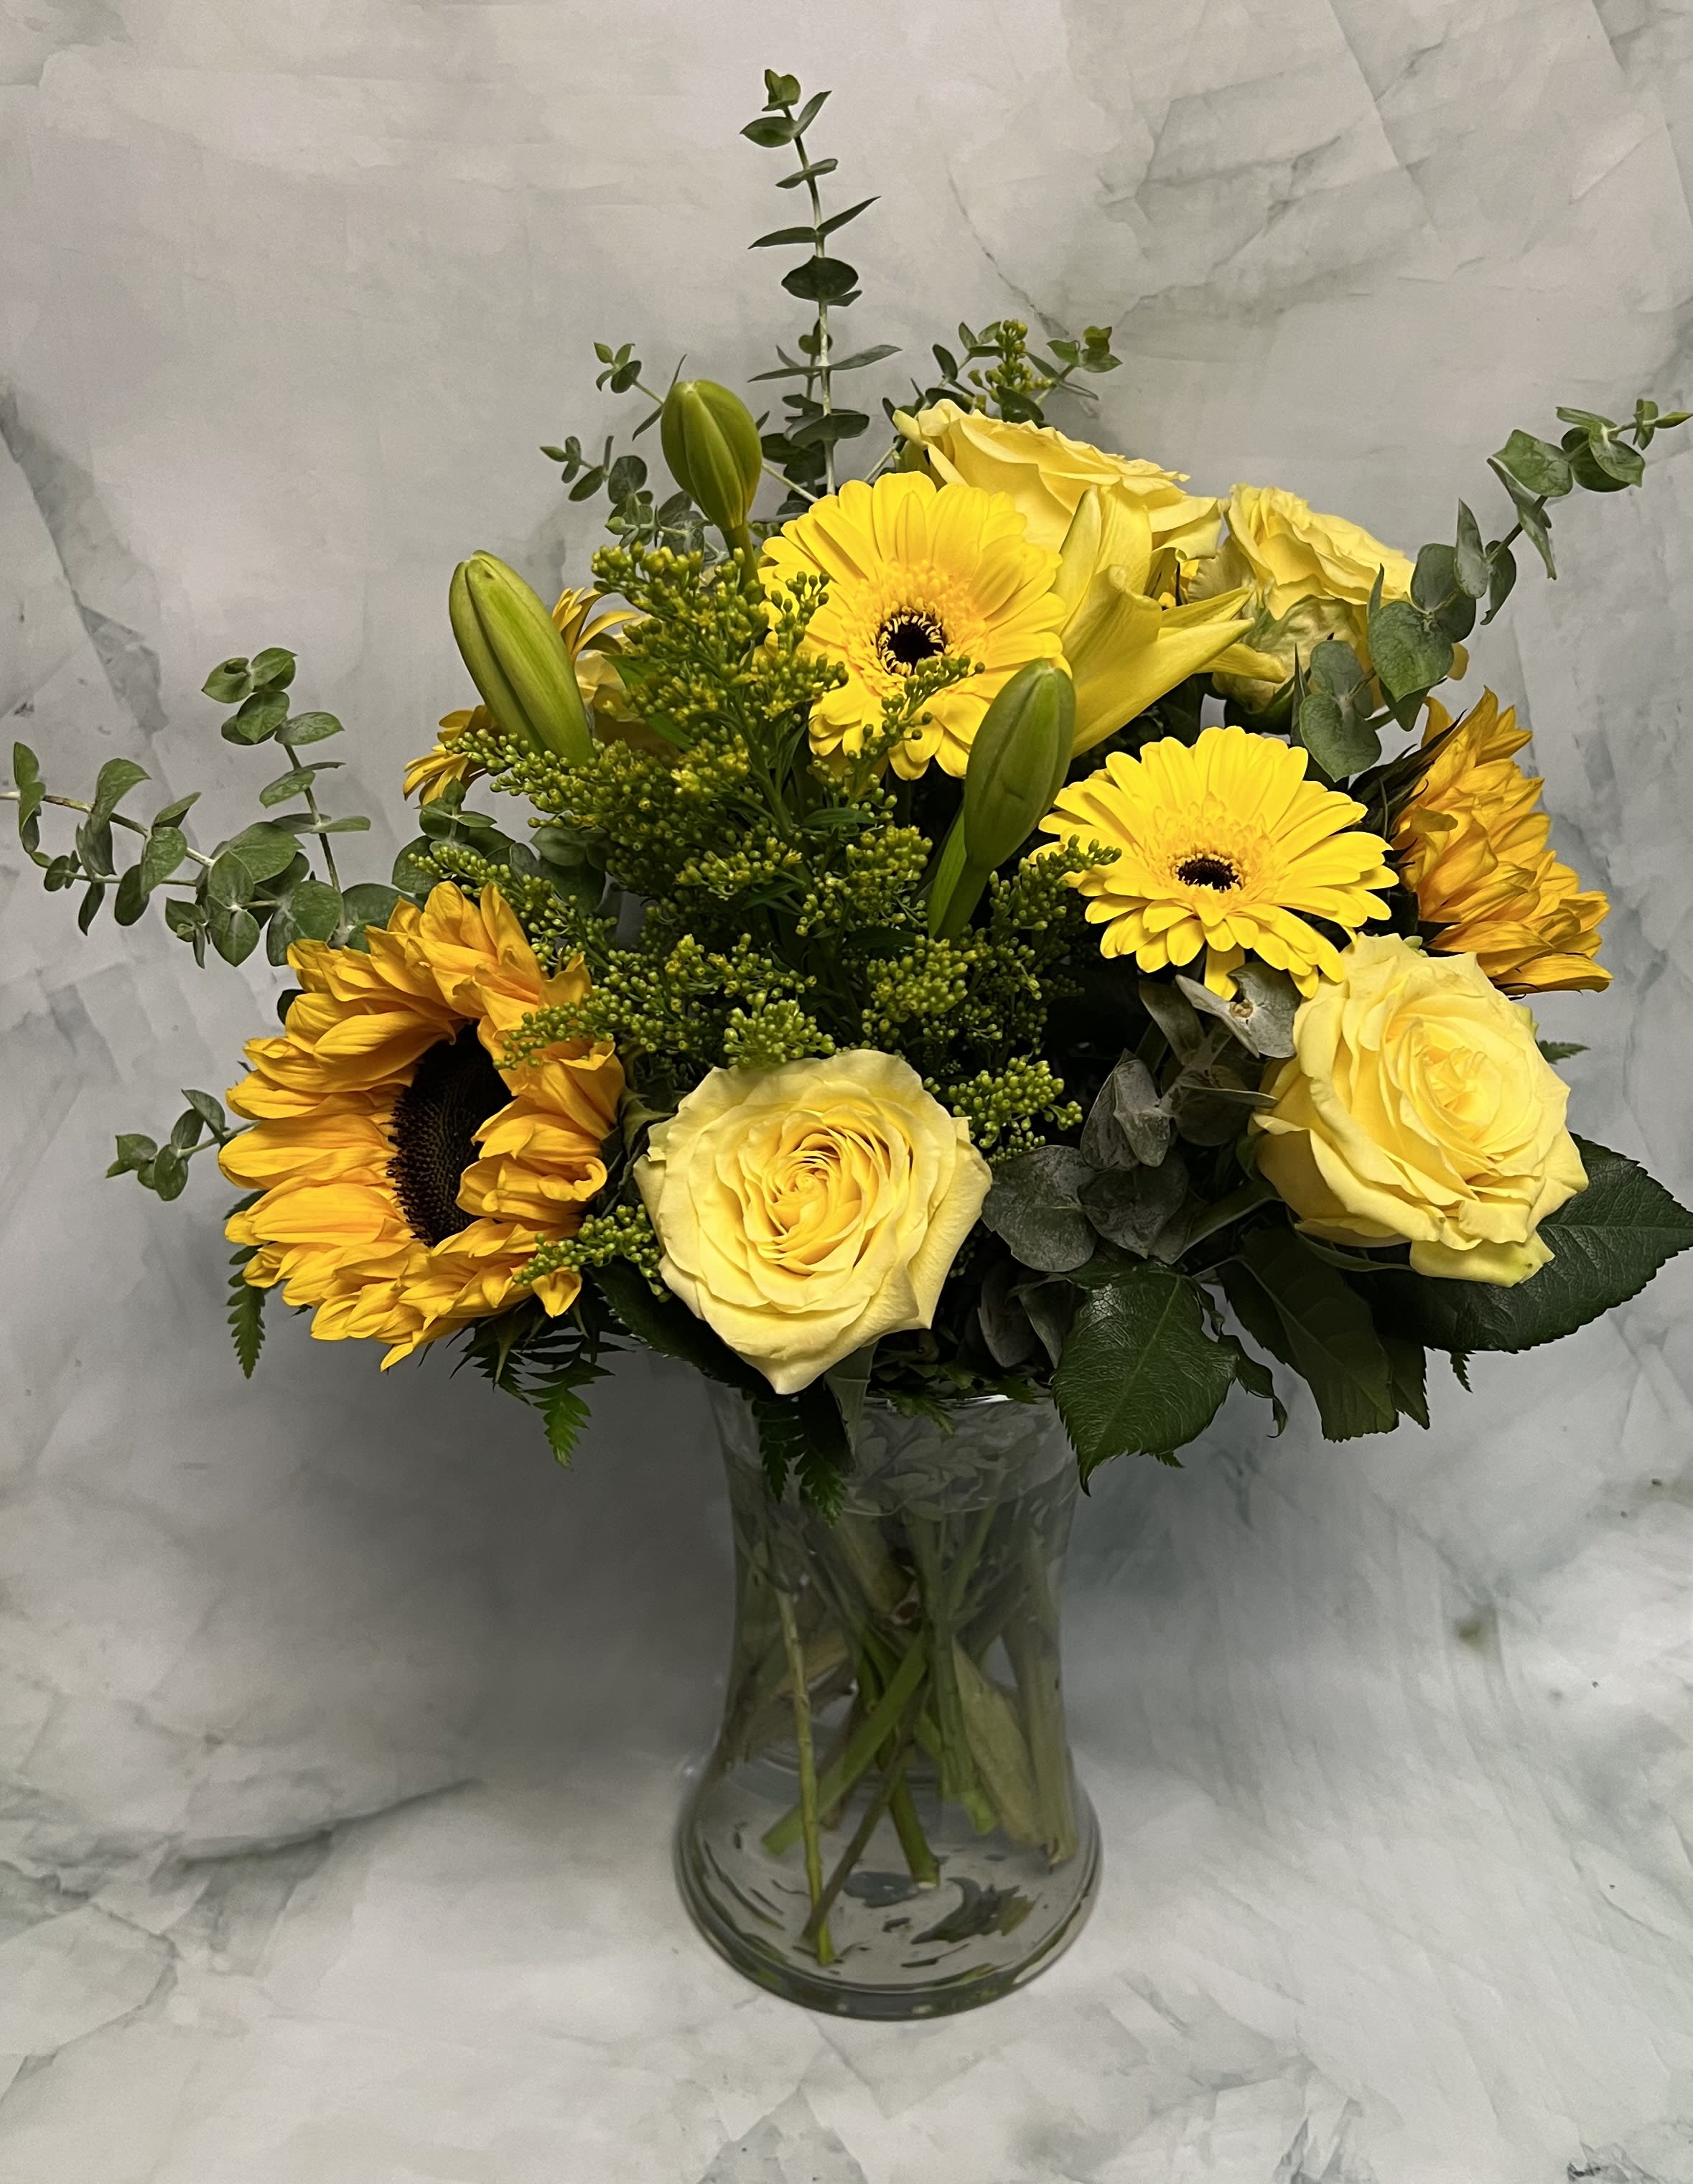 Lovely Sunshine - This arrangement is a ray of sunshine on a cloudy day. Cheer someone up with this bold arrangement filled with yellow flowers. This includes Sunflowers, Eucalyptus, Aster, Roses, and Gerber Daisies. 